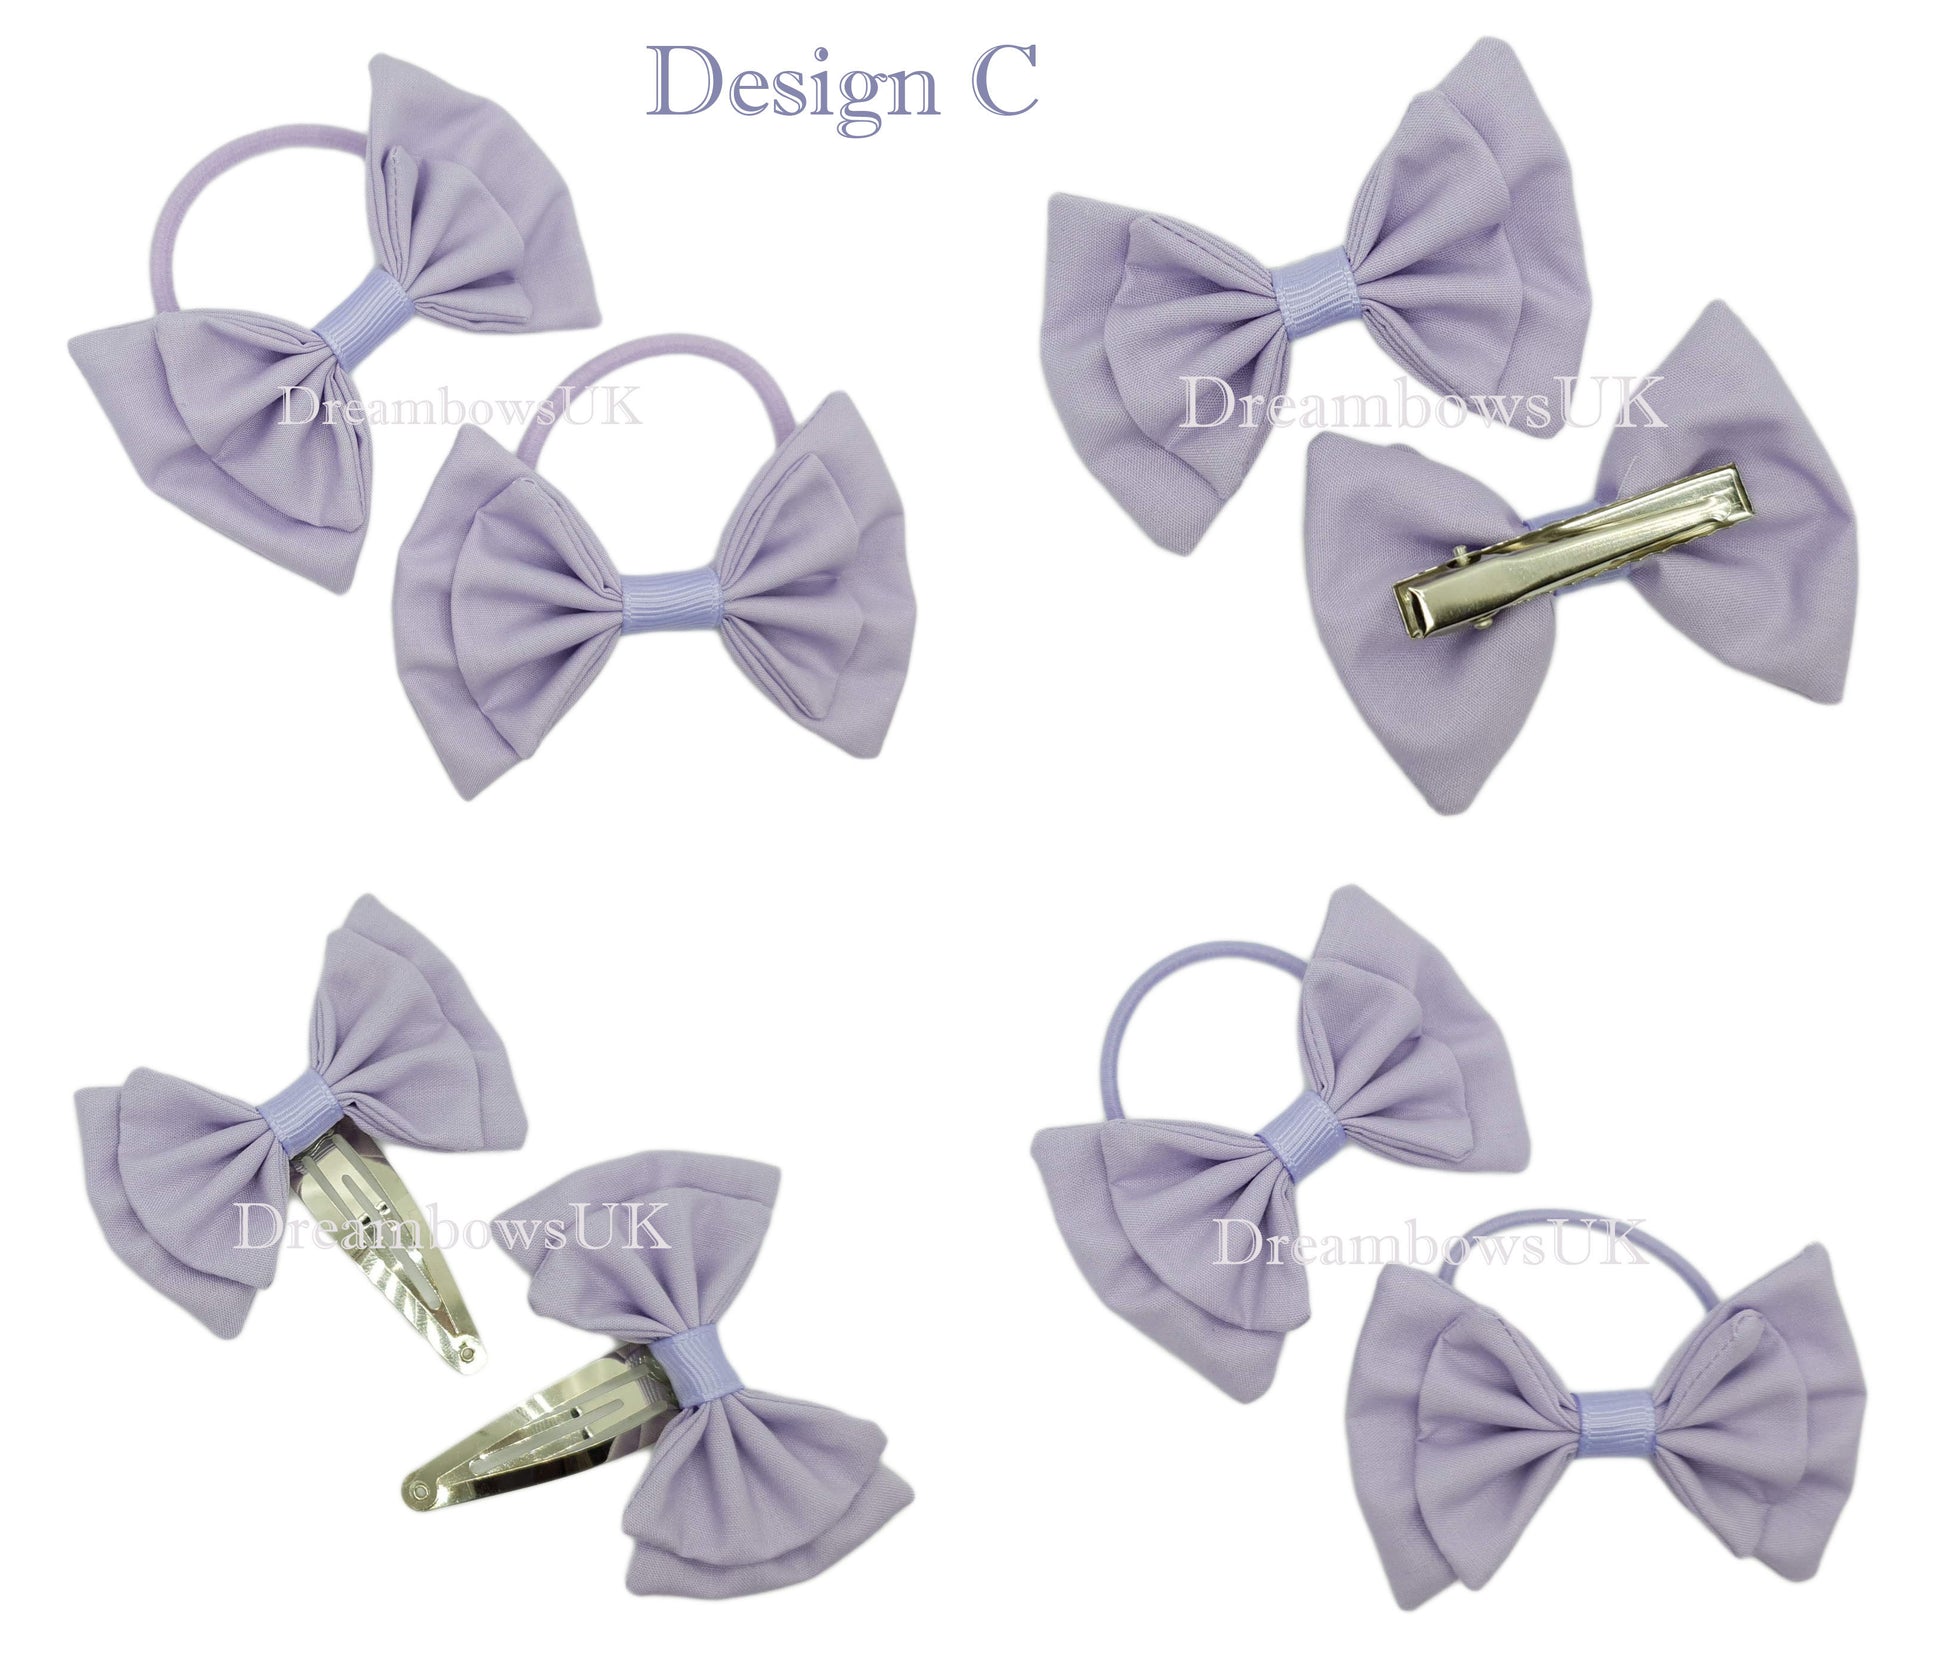 Girls custom made hair accessory bows on bobbles and hair clips